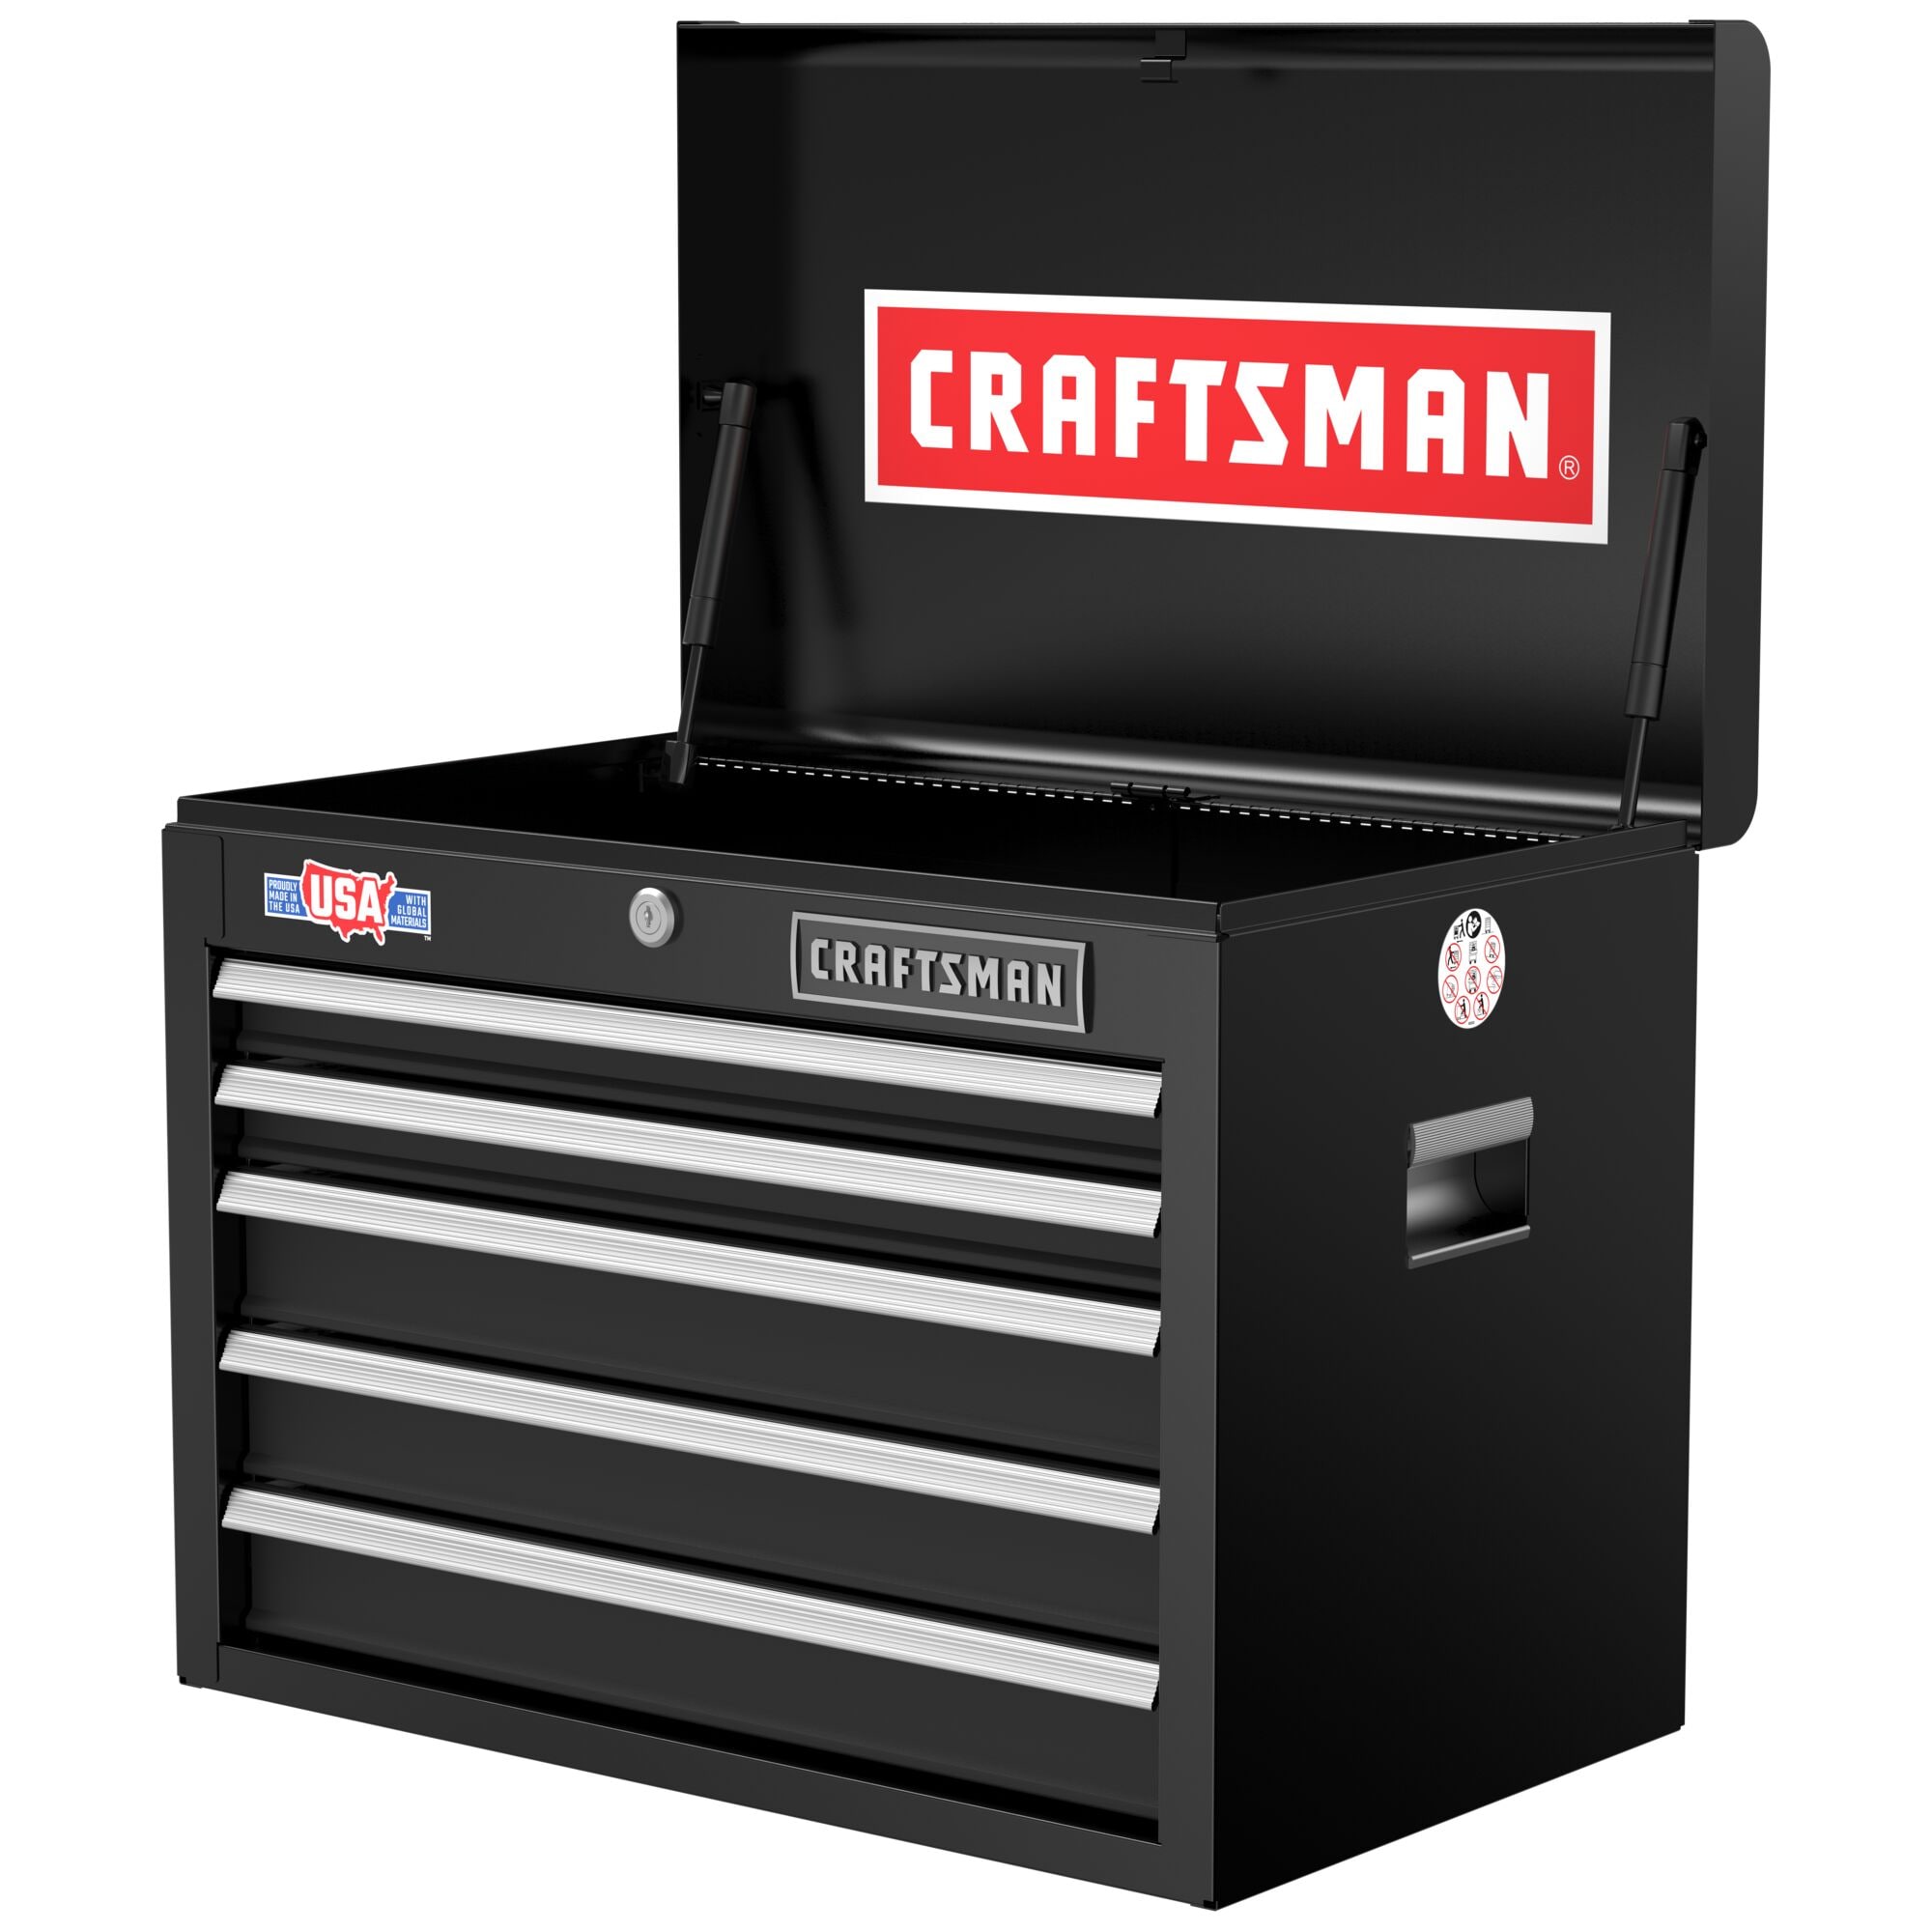 Tool Chests & Tool Cabinets, CRAFTSMAN, tool box